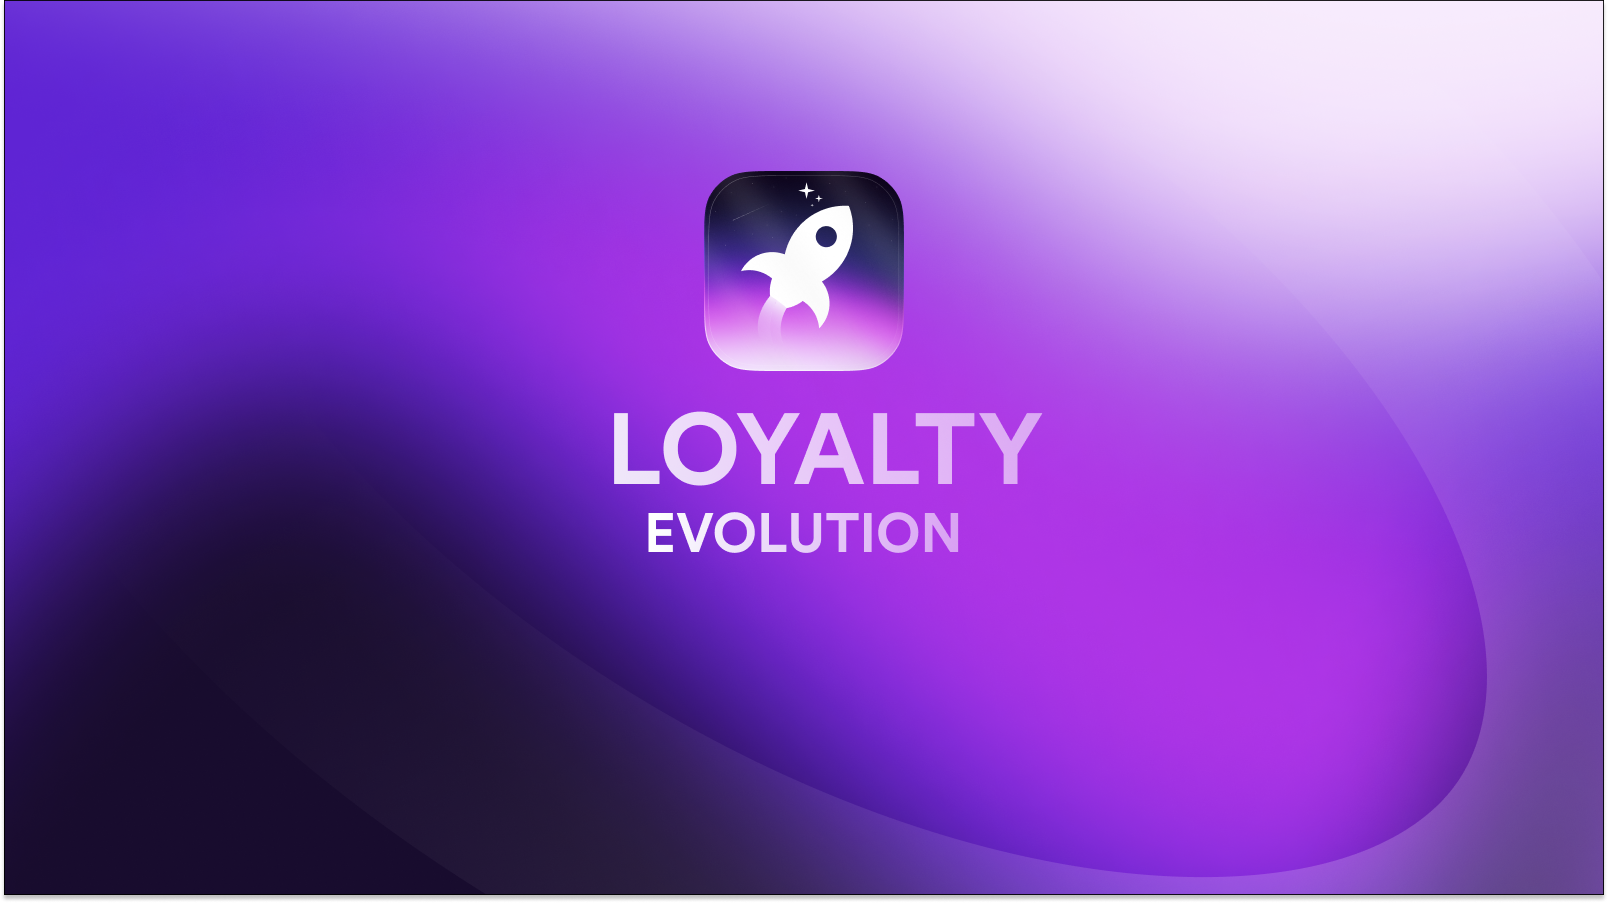 The Evolution of Loyalty: Unlocked by Web3